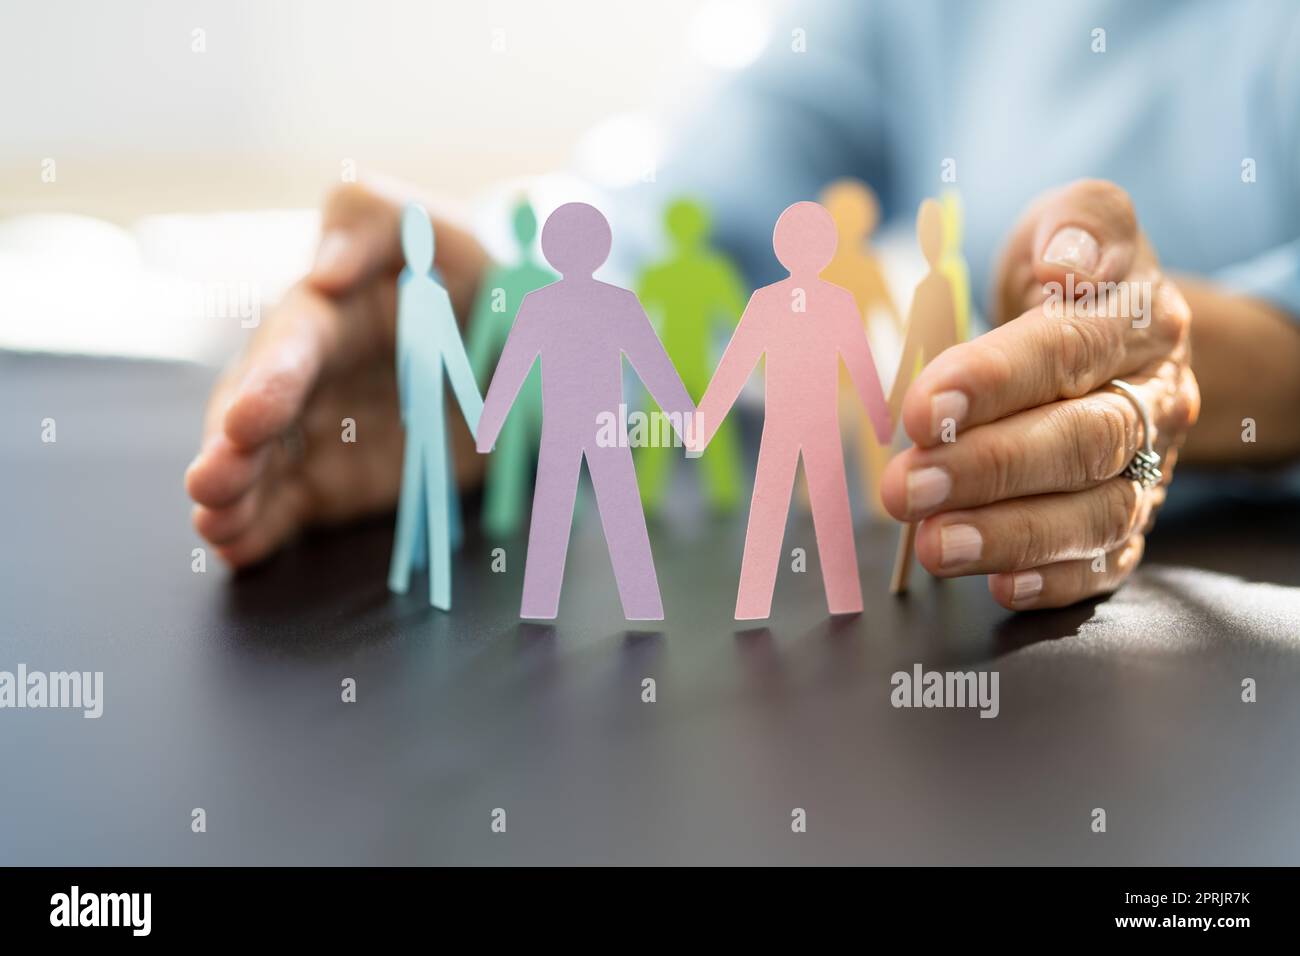 Diversity And Inclusion At Workplace. LGBT Leadership Stock Photo